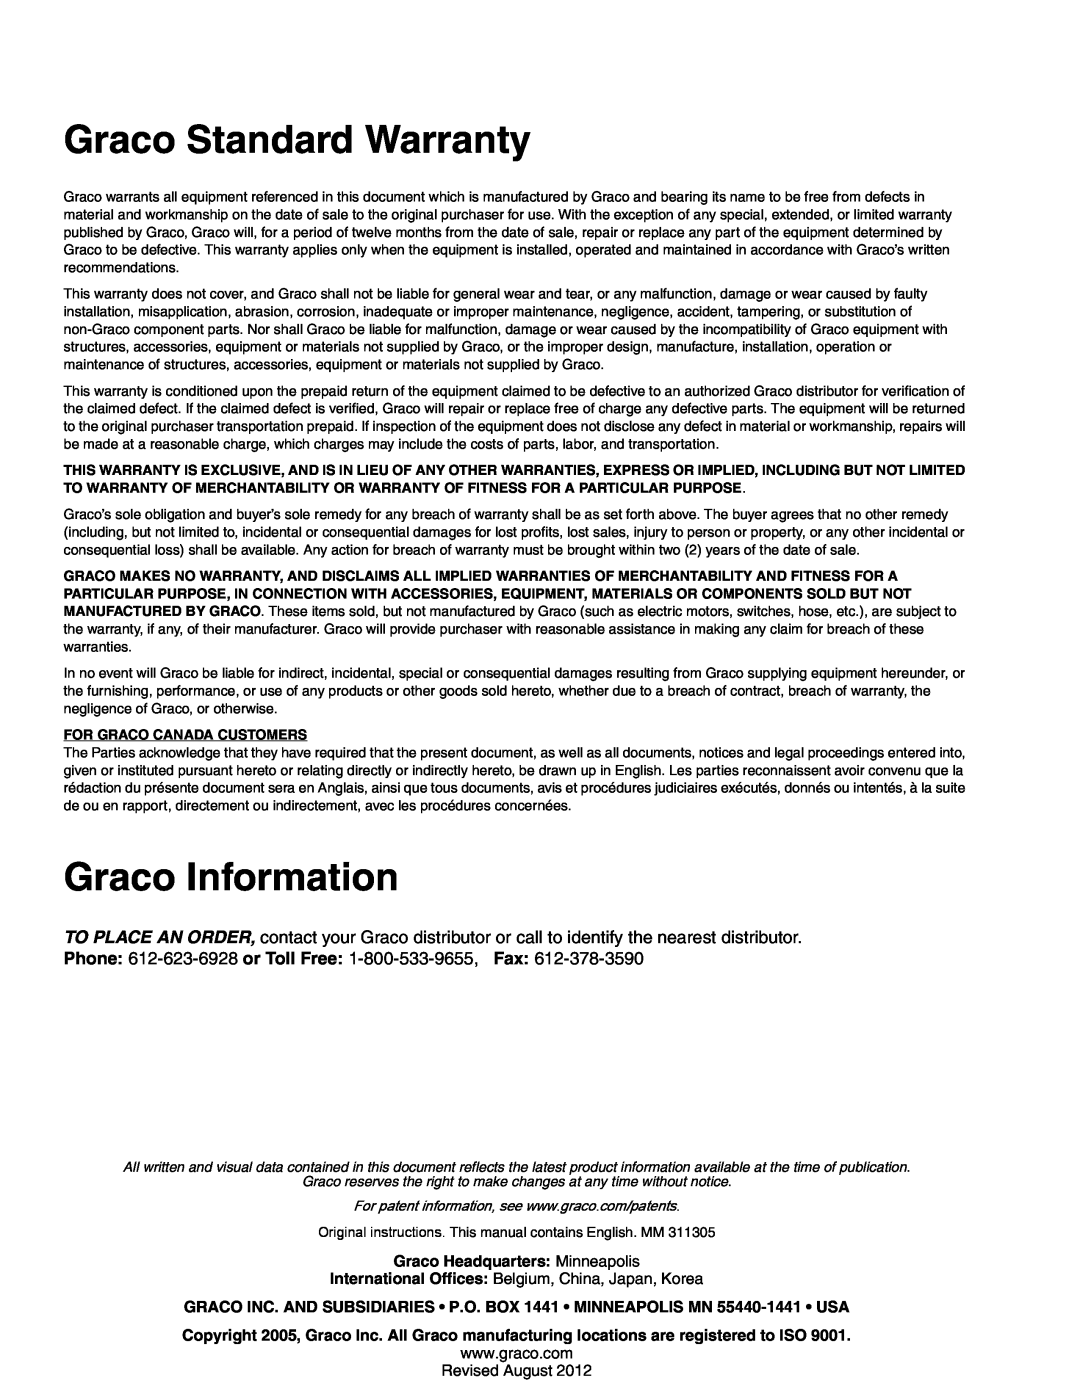 Graco Inc 260101, 260102, 260104, 260100 important safety instructions Graco Standard Warranty, Graco Information 